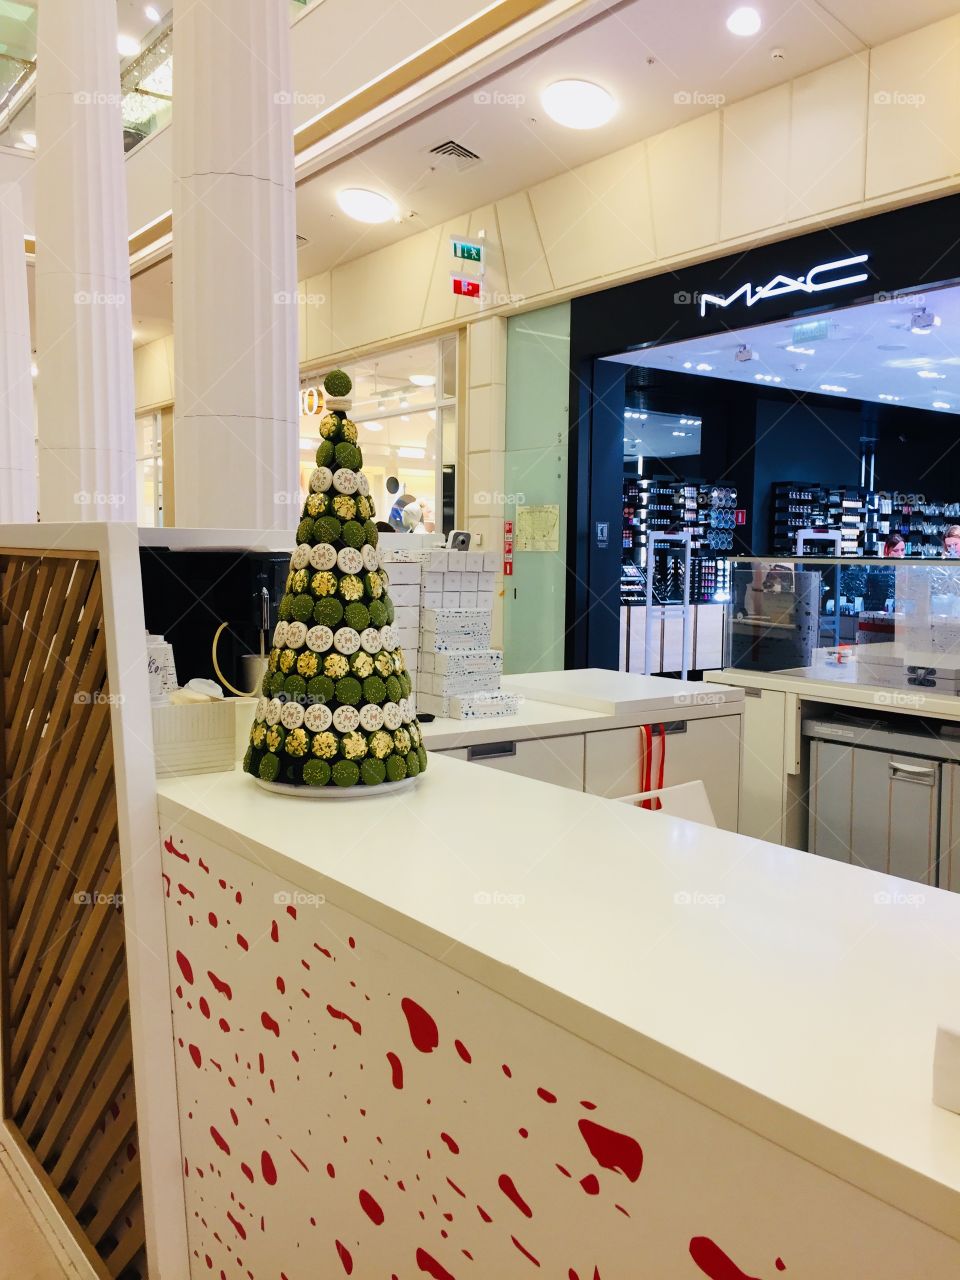 Cute little Christmas tree made with macrons 🎄